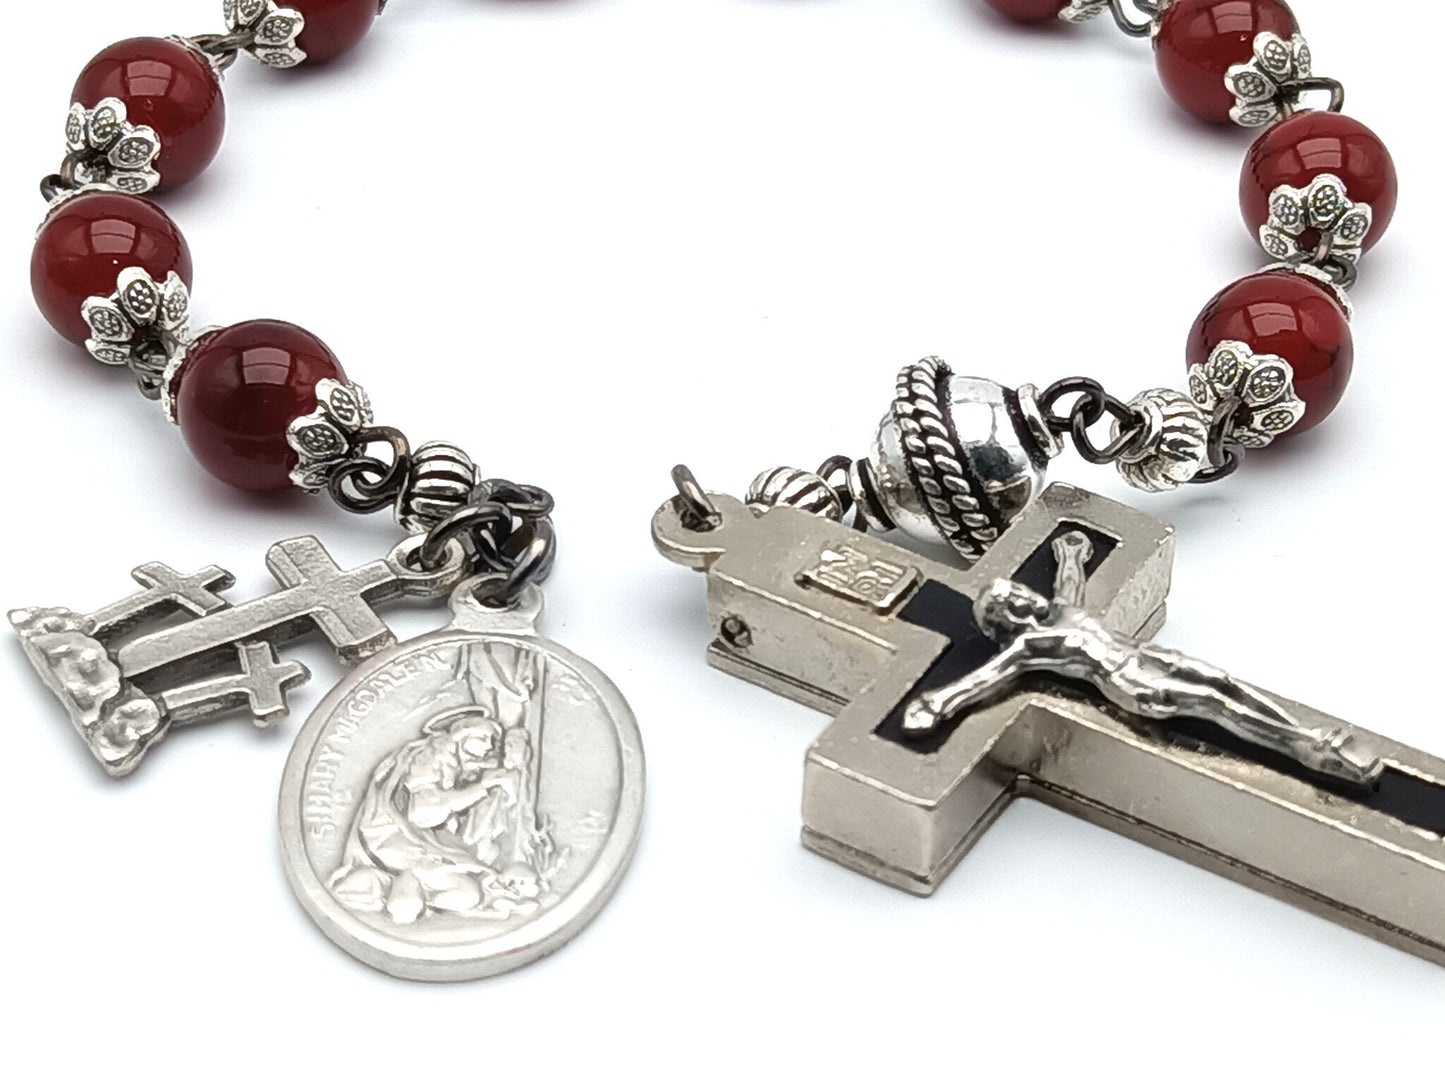 Saint Mary Magdalene unique rosary beads single decade with red glass beads, reliquary crucifix, silver pater bead and medals.